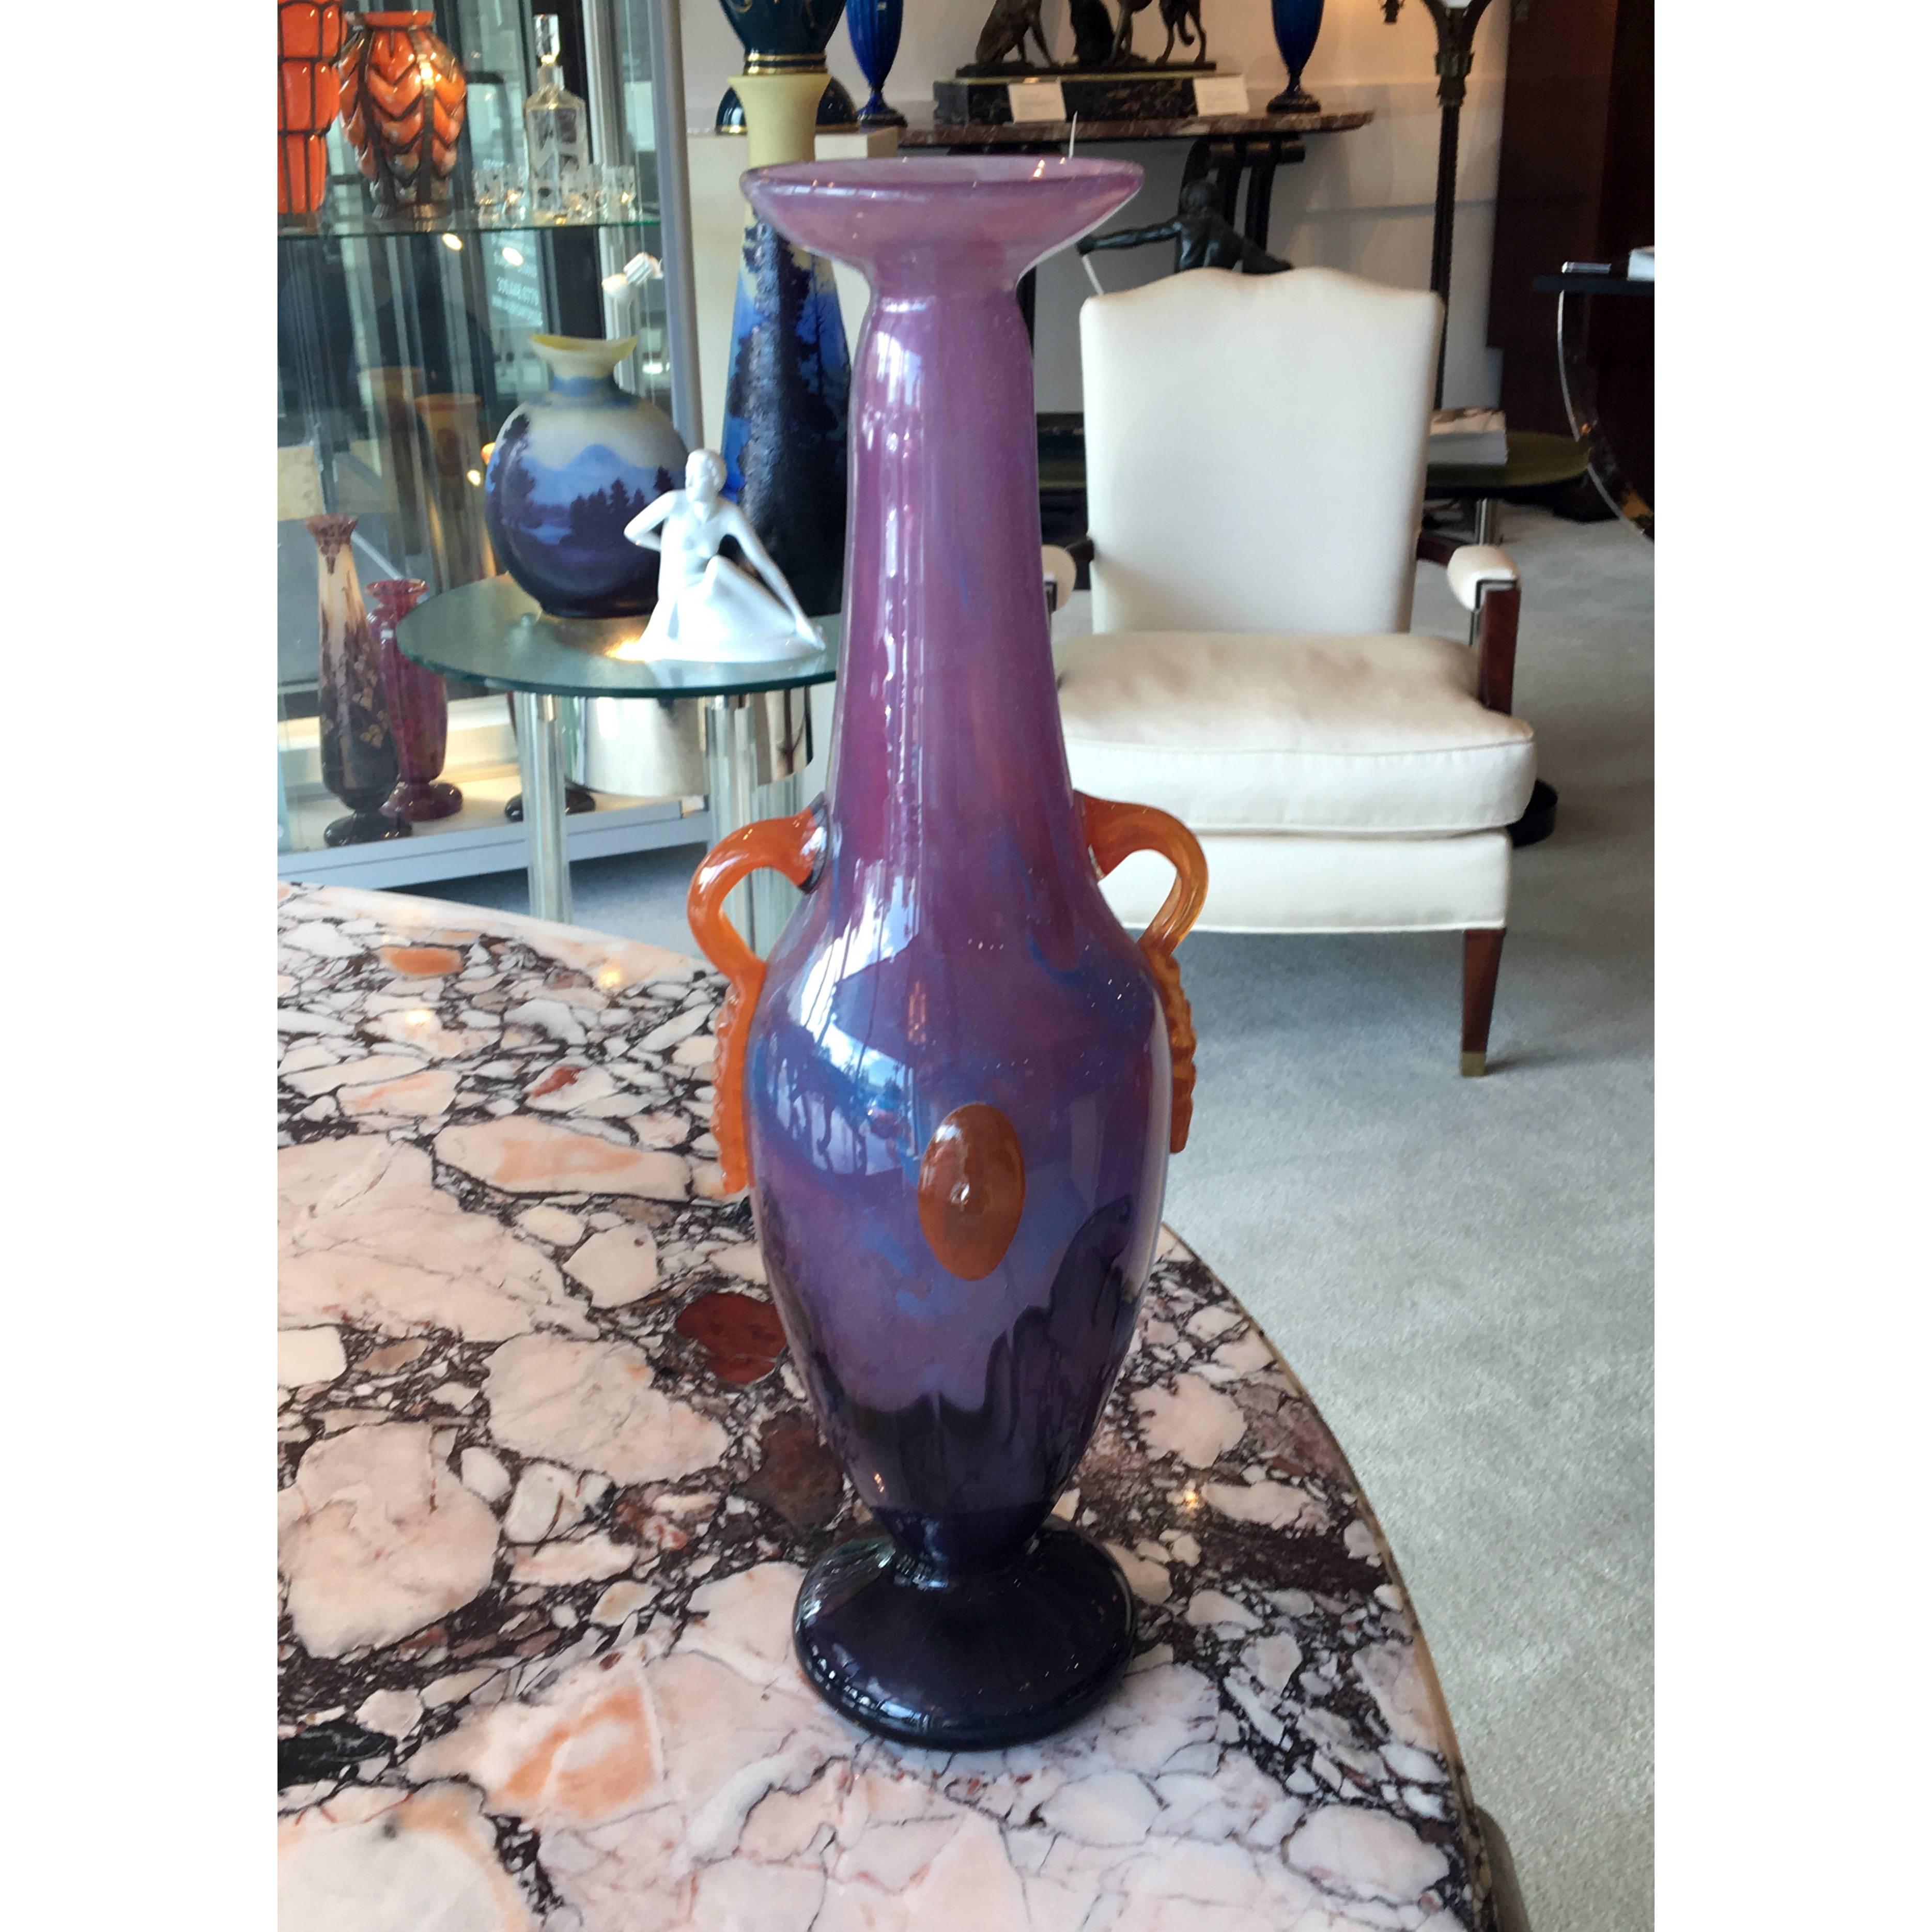 Art Deco artistic glass vase by Charles Schneider, with purple and lavender colors and applied orange glass handles and details.
   